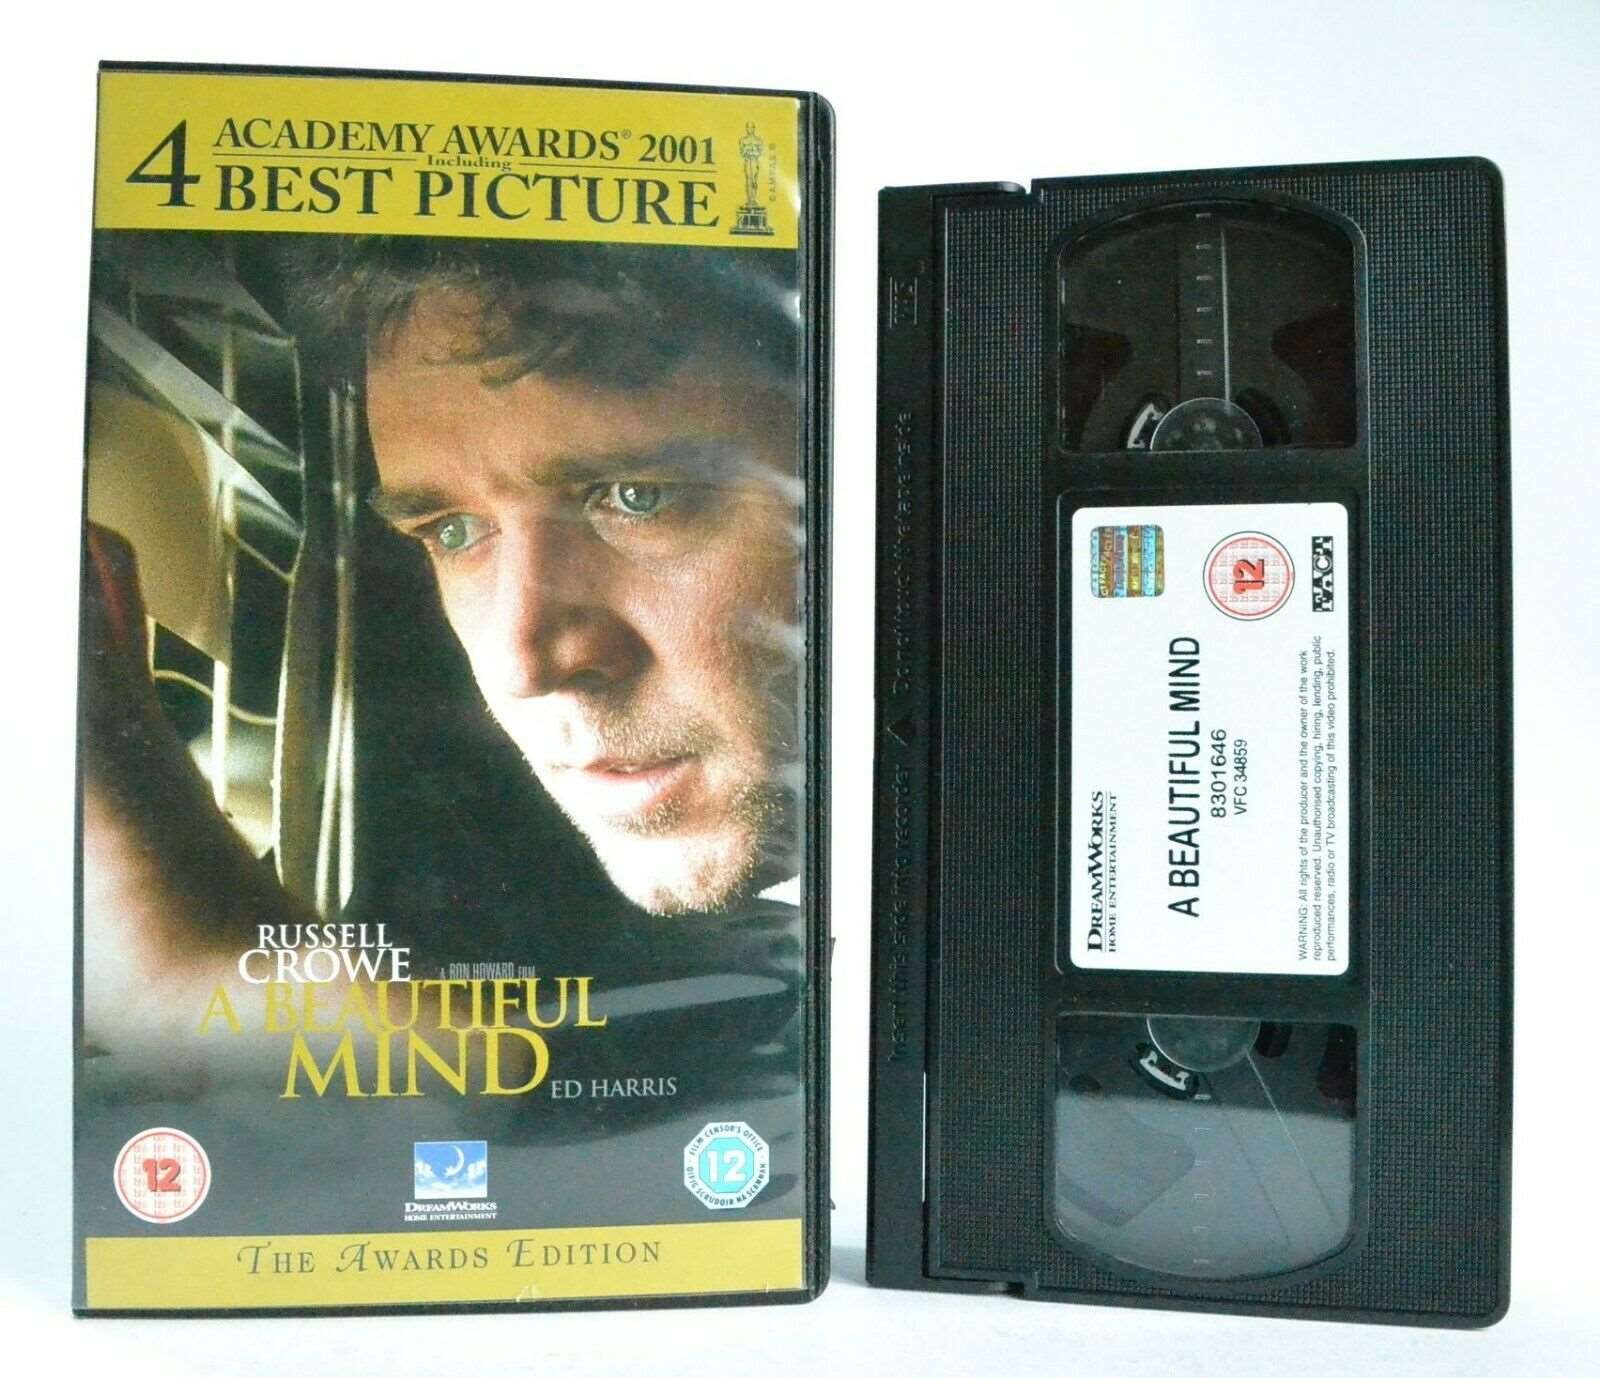 A Beautiful Mind: Awards Edition - Based On True Events - Drama - R.Crowe - VHS-